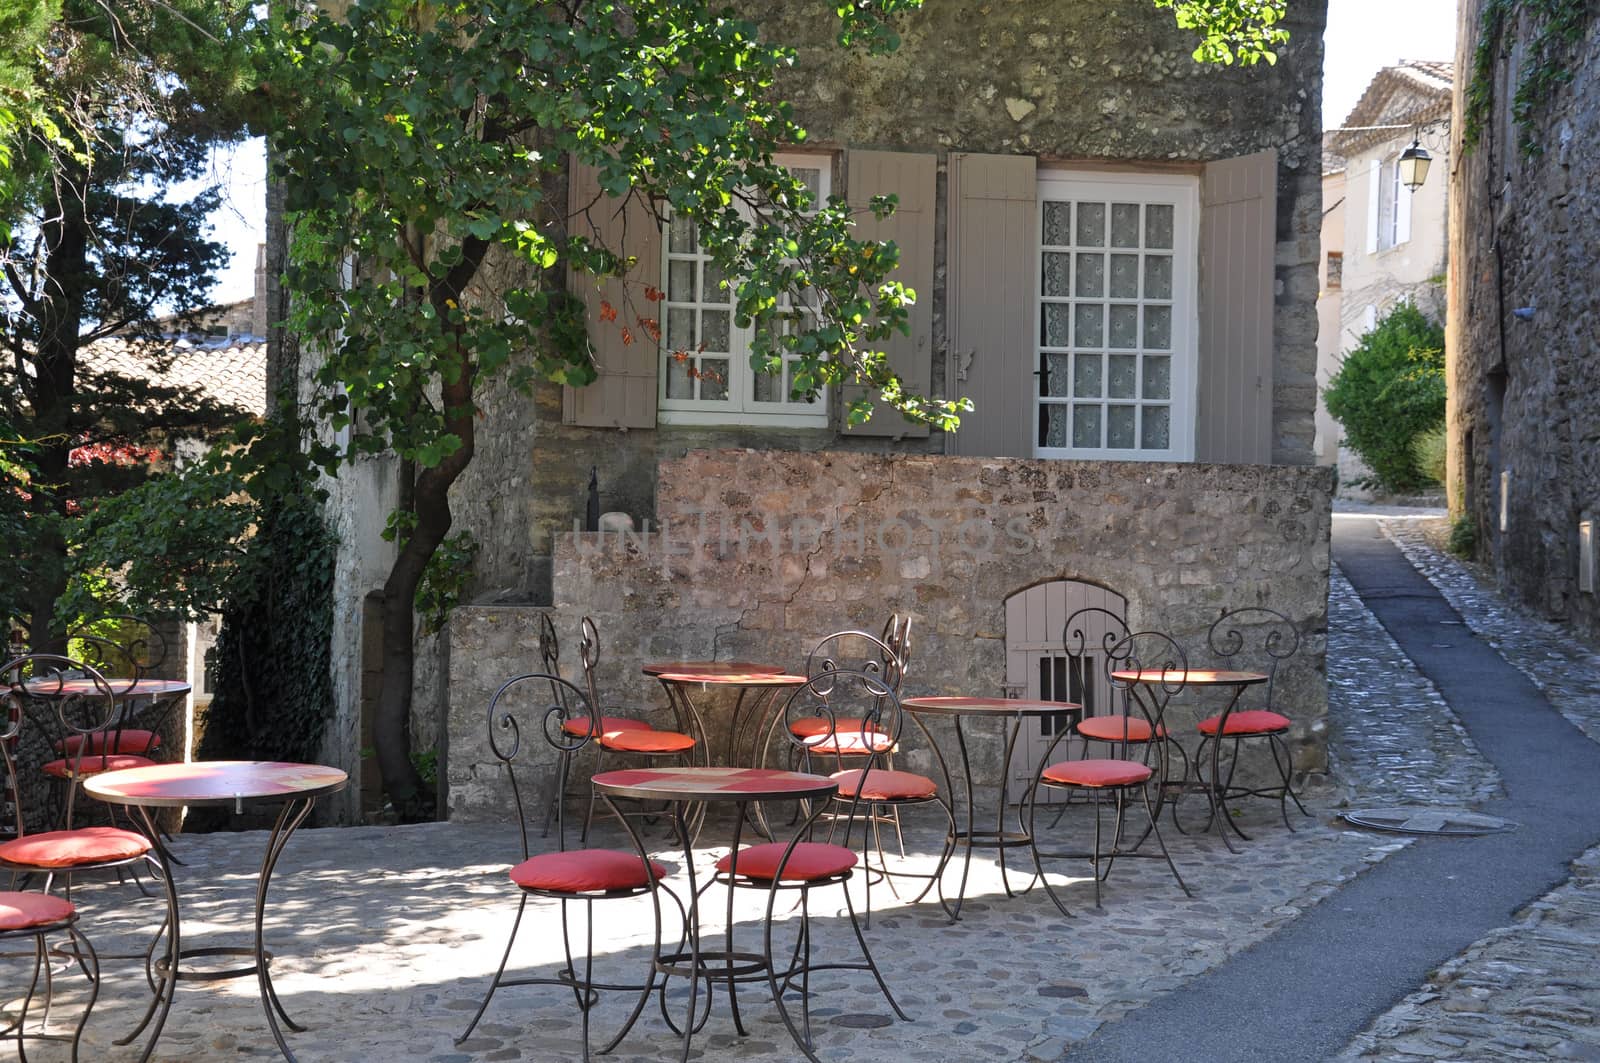 A Cafe in a pretty French village by dpe123